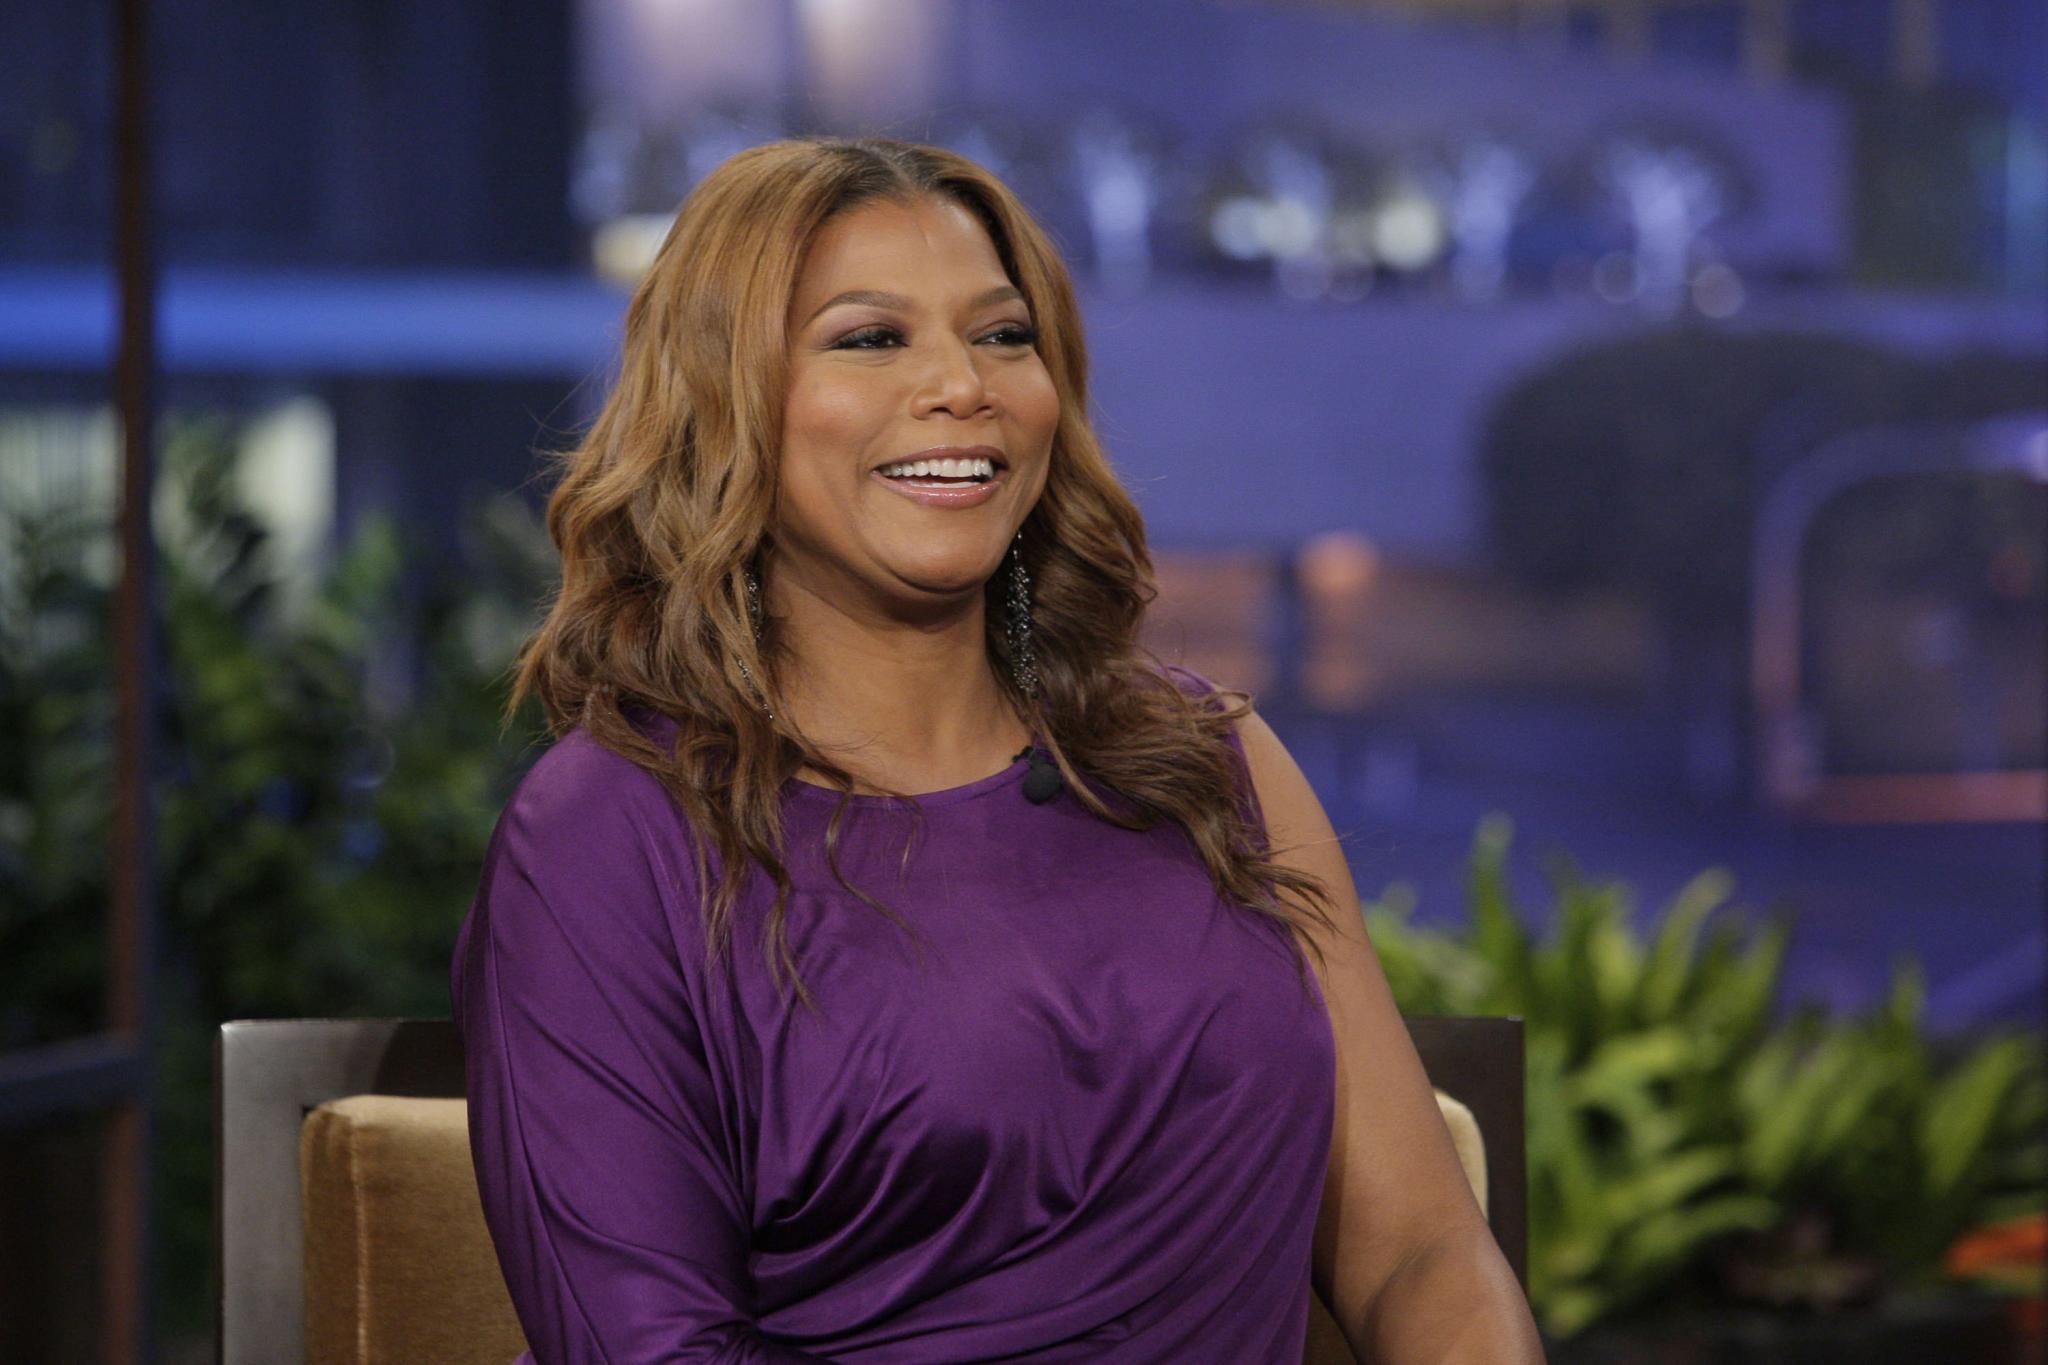 How Well Do You Know Queen Latifah?
